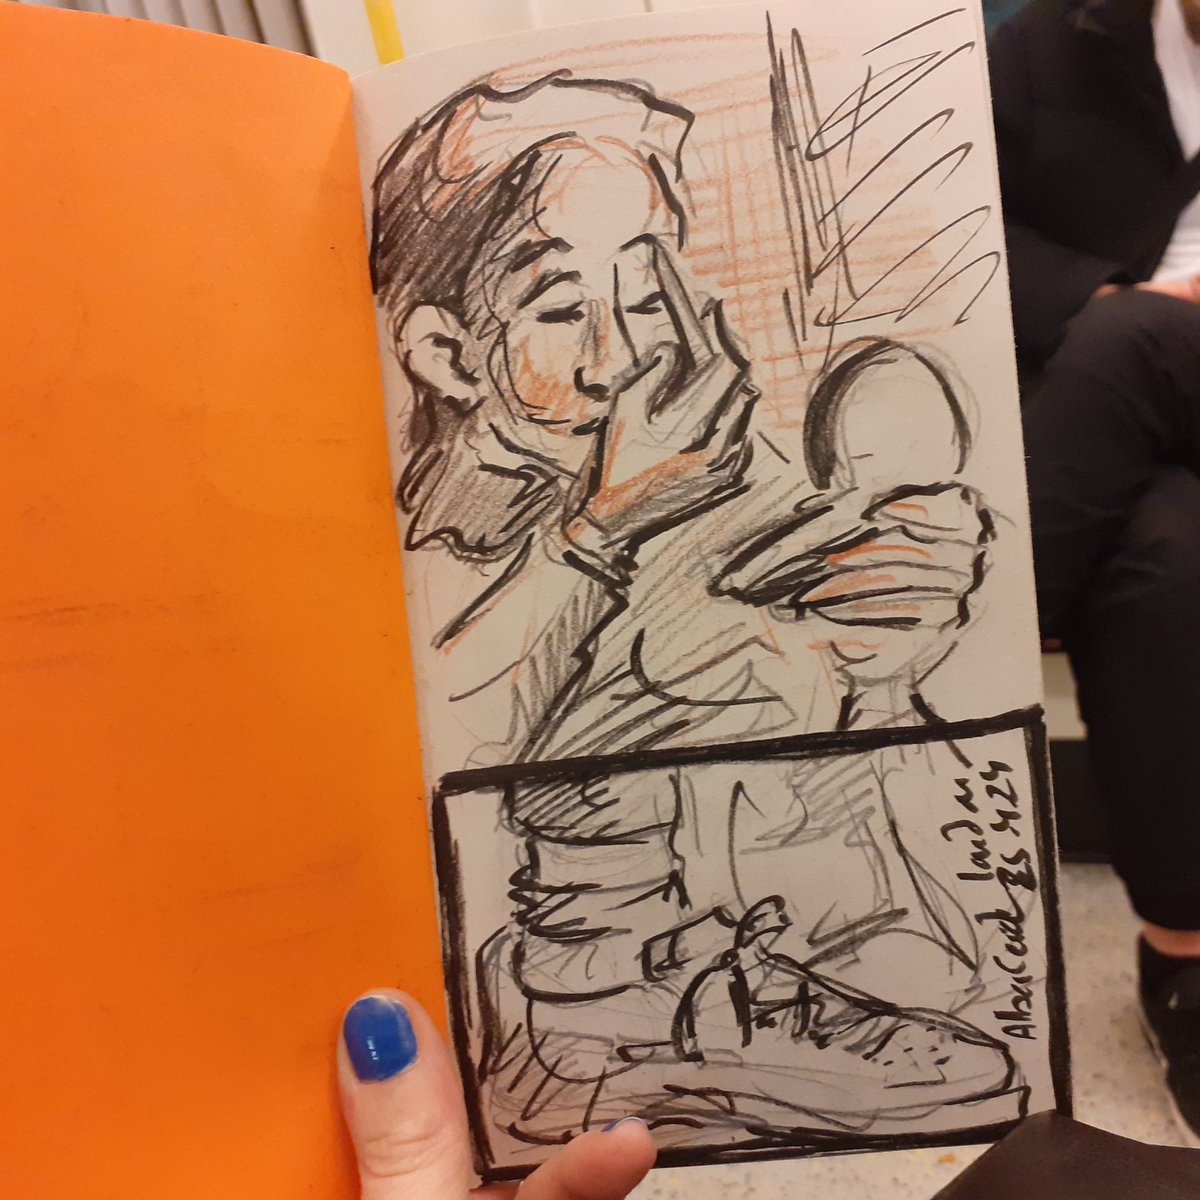 Sketching this morning on the tube, a woman painting her eyebrows and someone next to her's shoe

#lifedrawing #lifedrawingcomic #pencilsketch #londonunderground